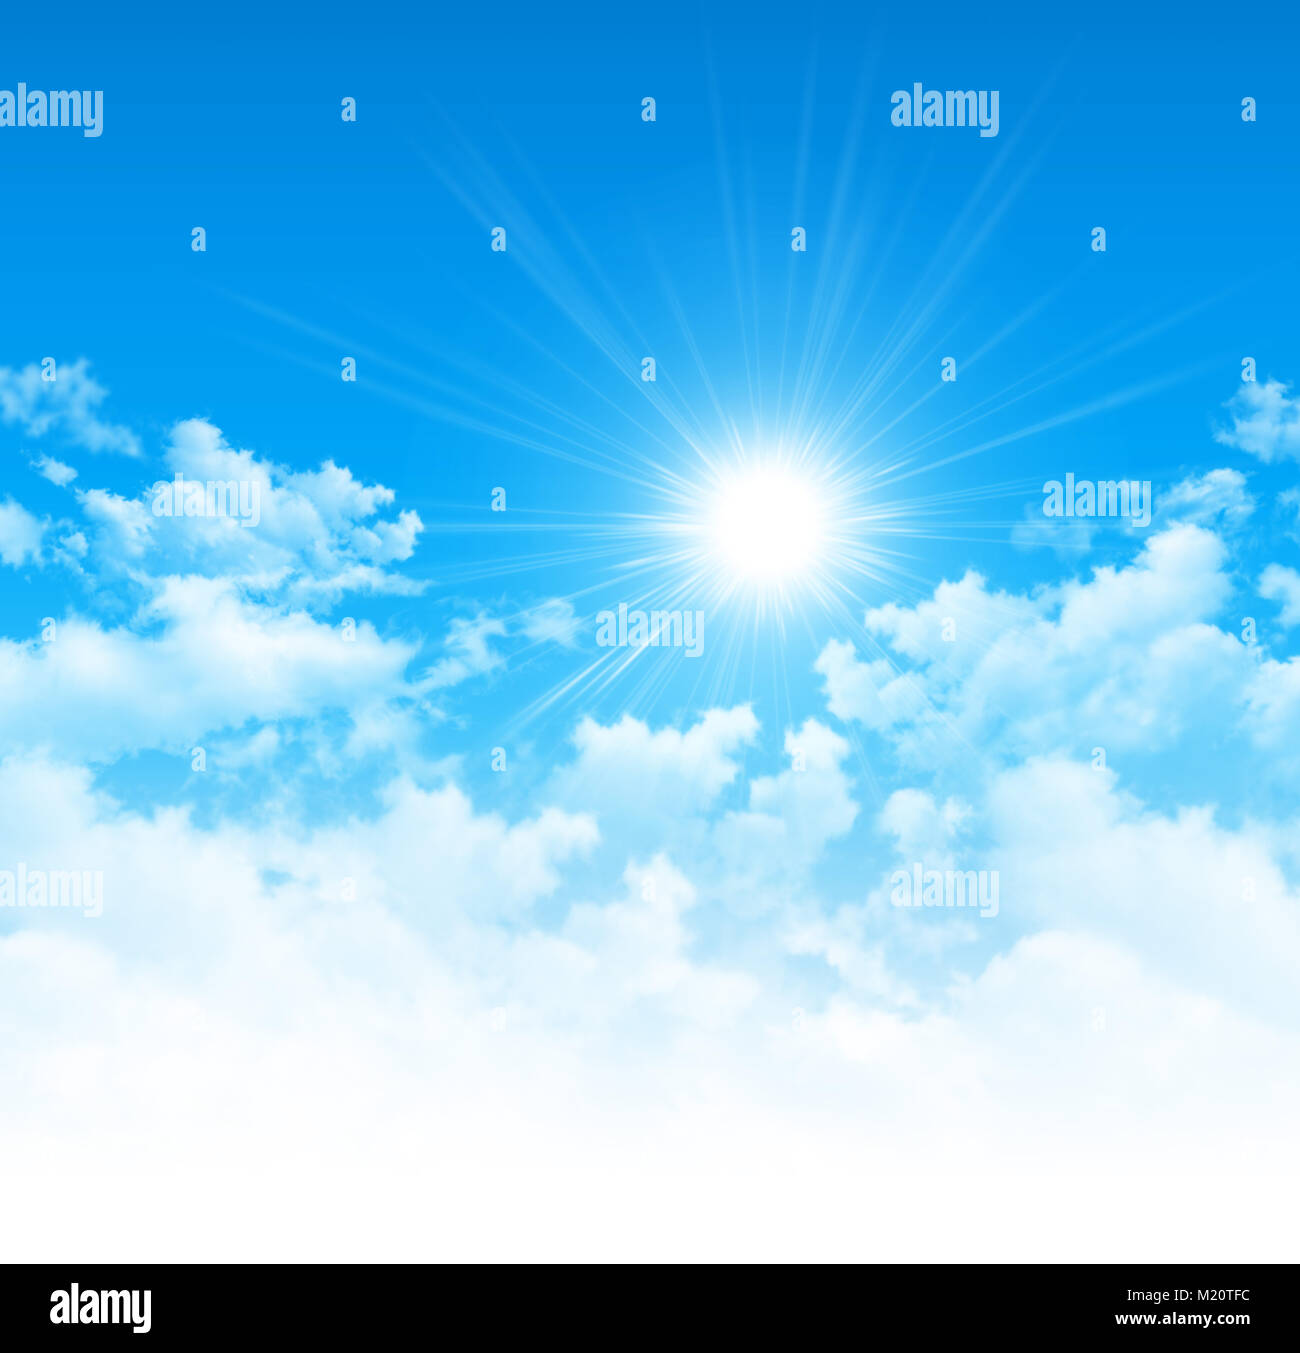 Shining sun behind white clouds in blue sky Stock Photo